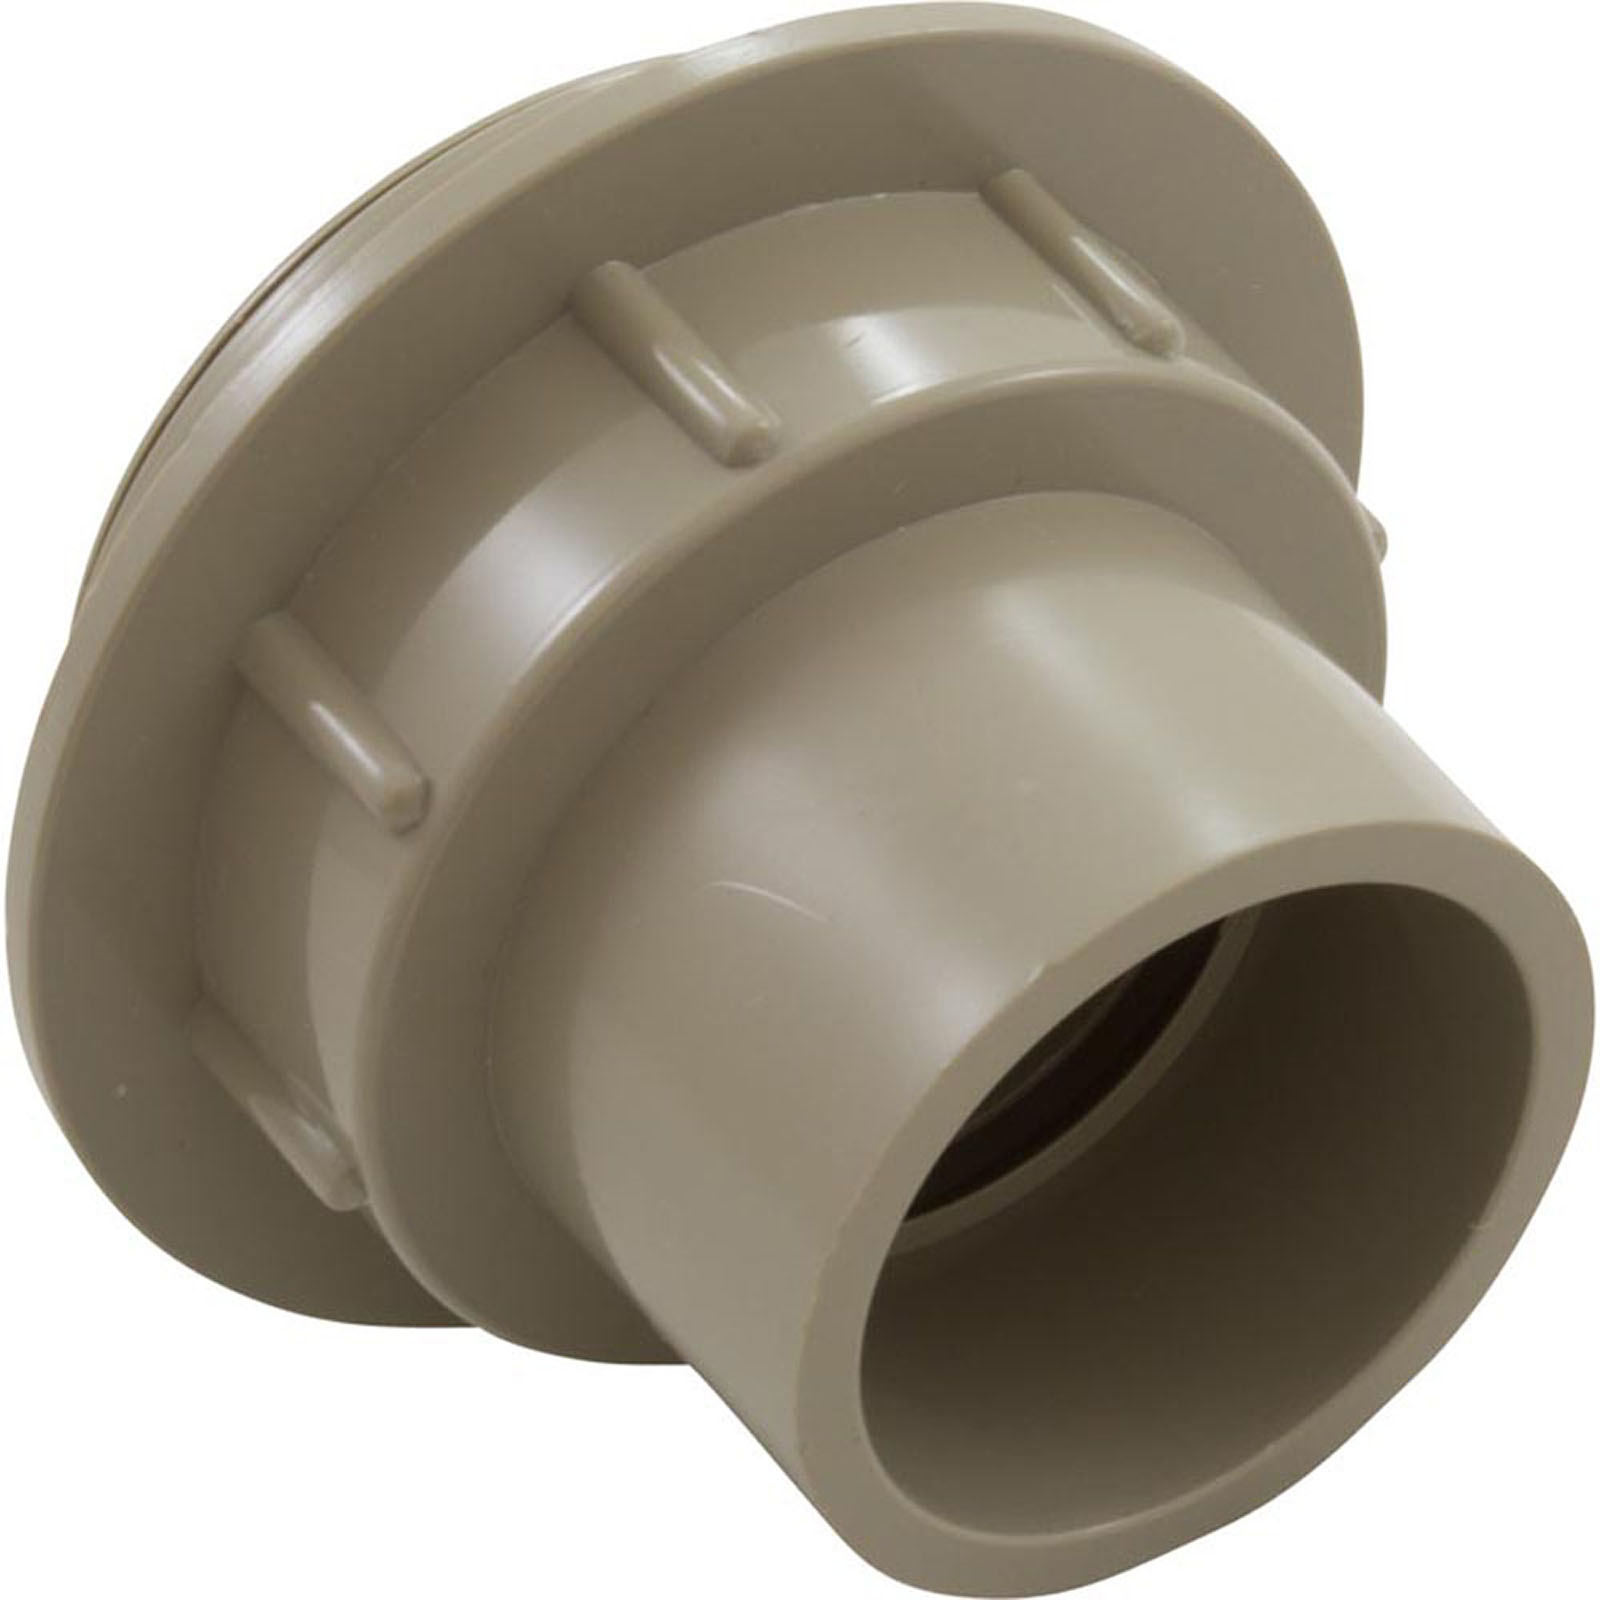 Zodiac Pool Solutions Return Fitting/Inlet, Zodiac ThreadCare, 1.5" and 1", Gold